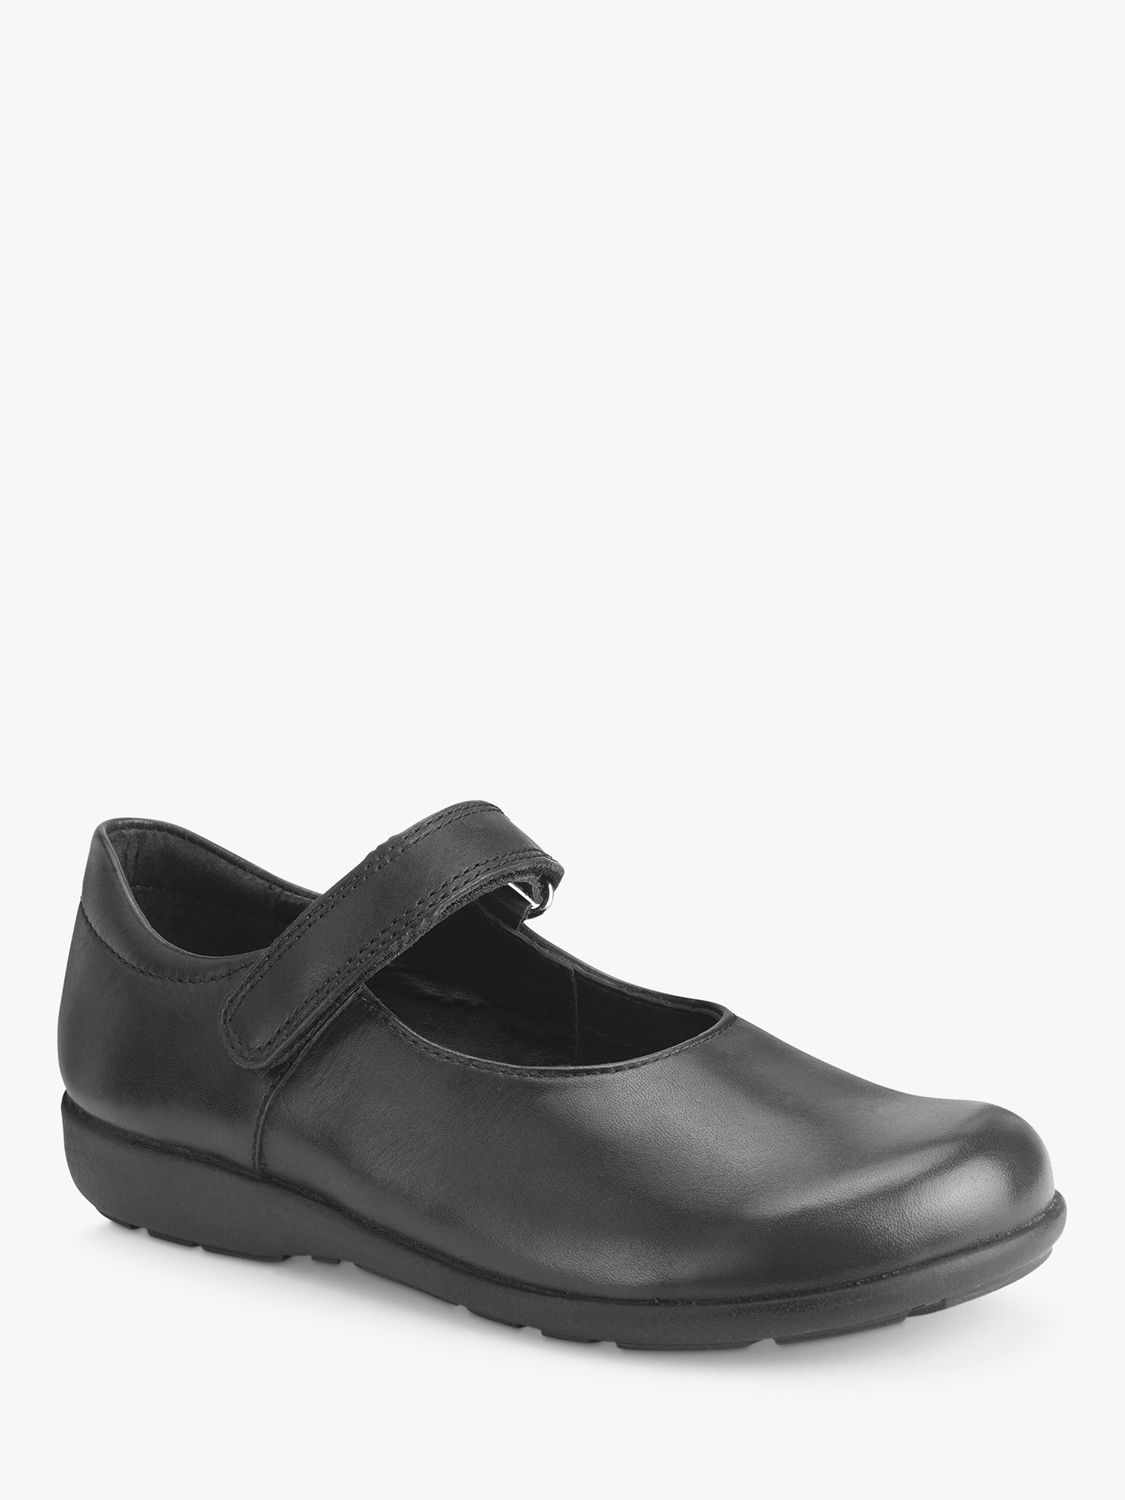 Simply by Start-Rite Kids' Classroom Leather School Shoes, Black, Black, 2G Jnr